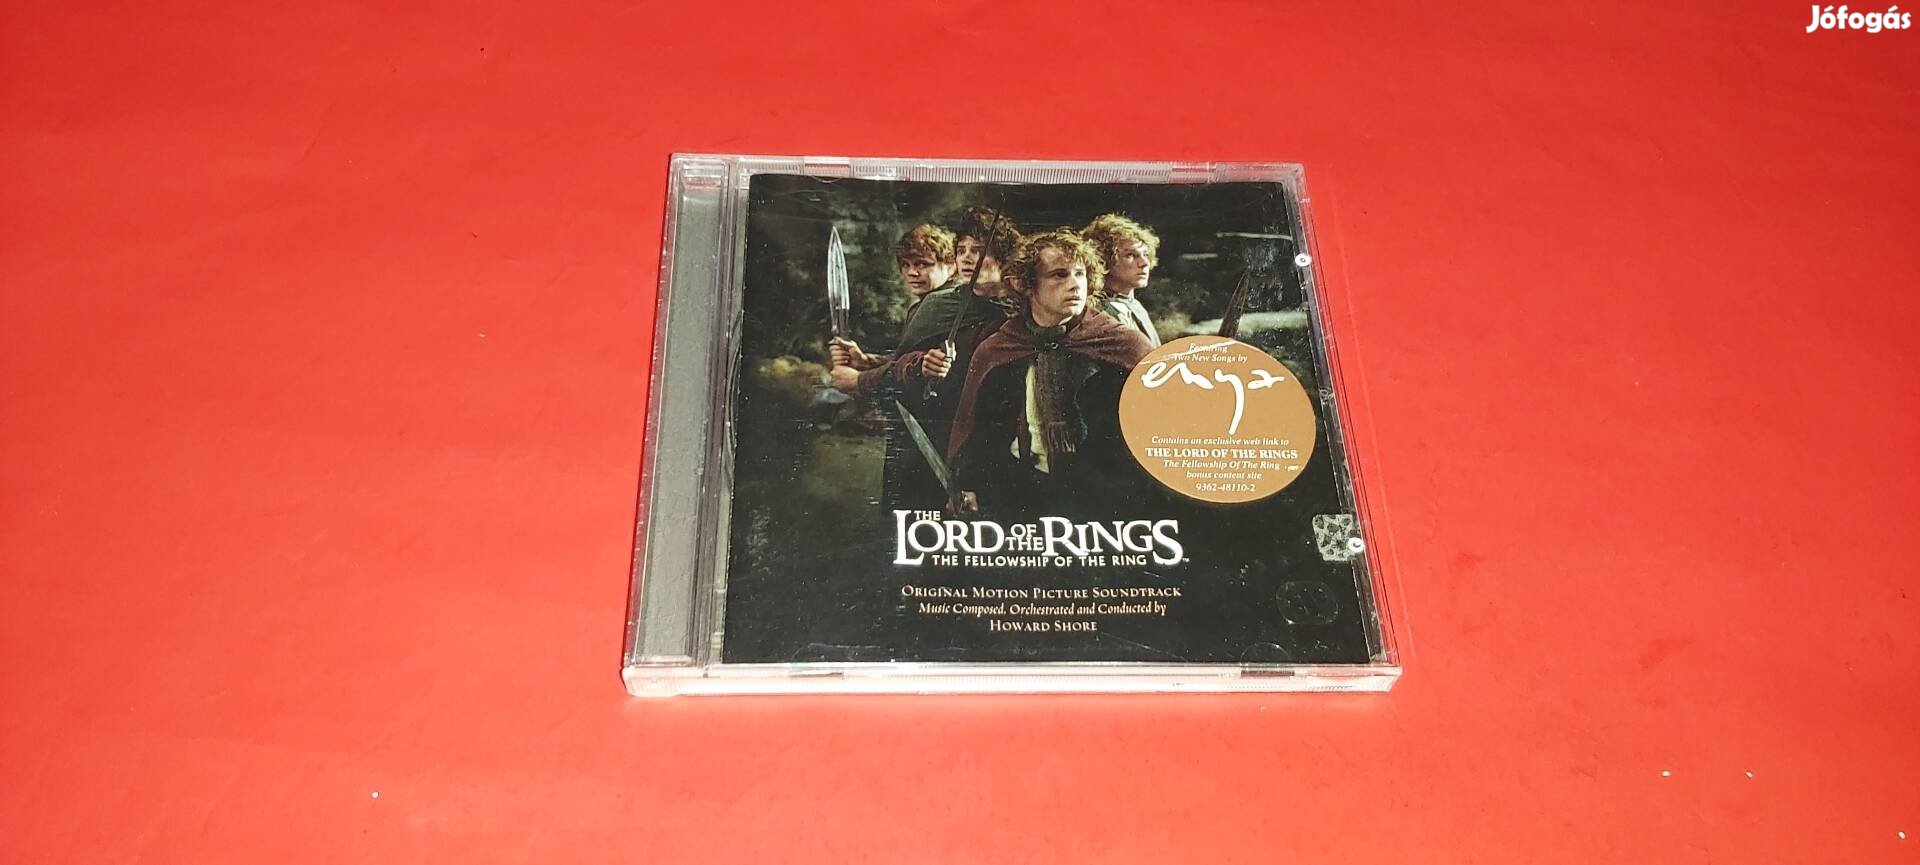 The Lord of the Rings The fellowship of the ring soundtrack Cd 2001